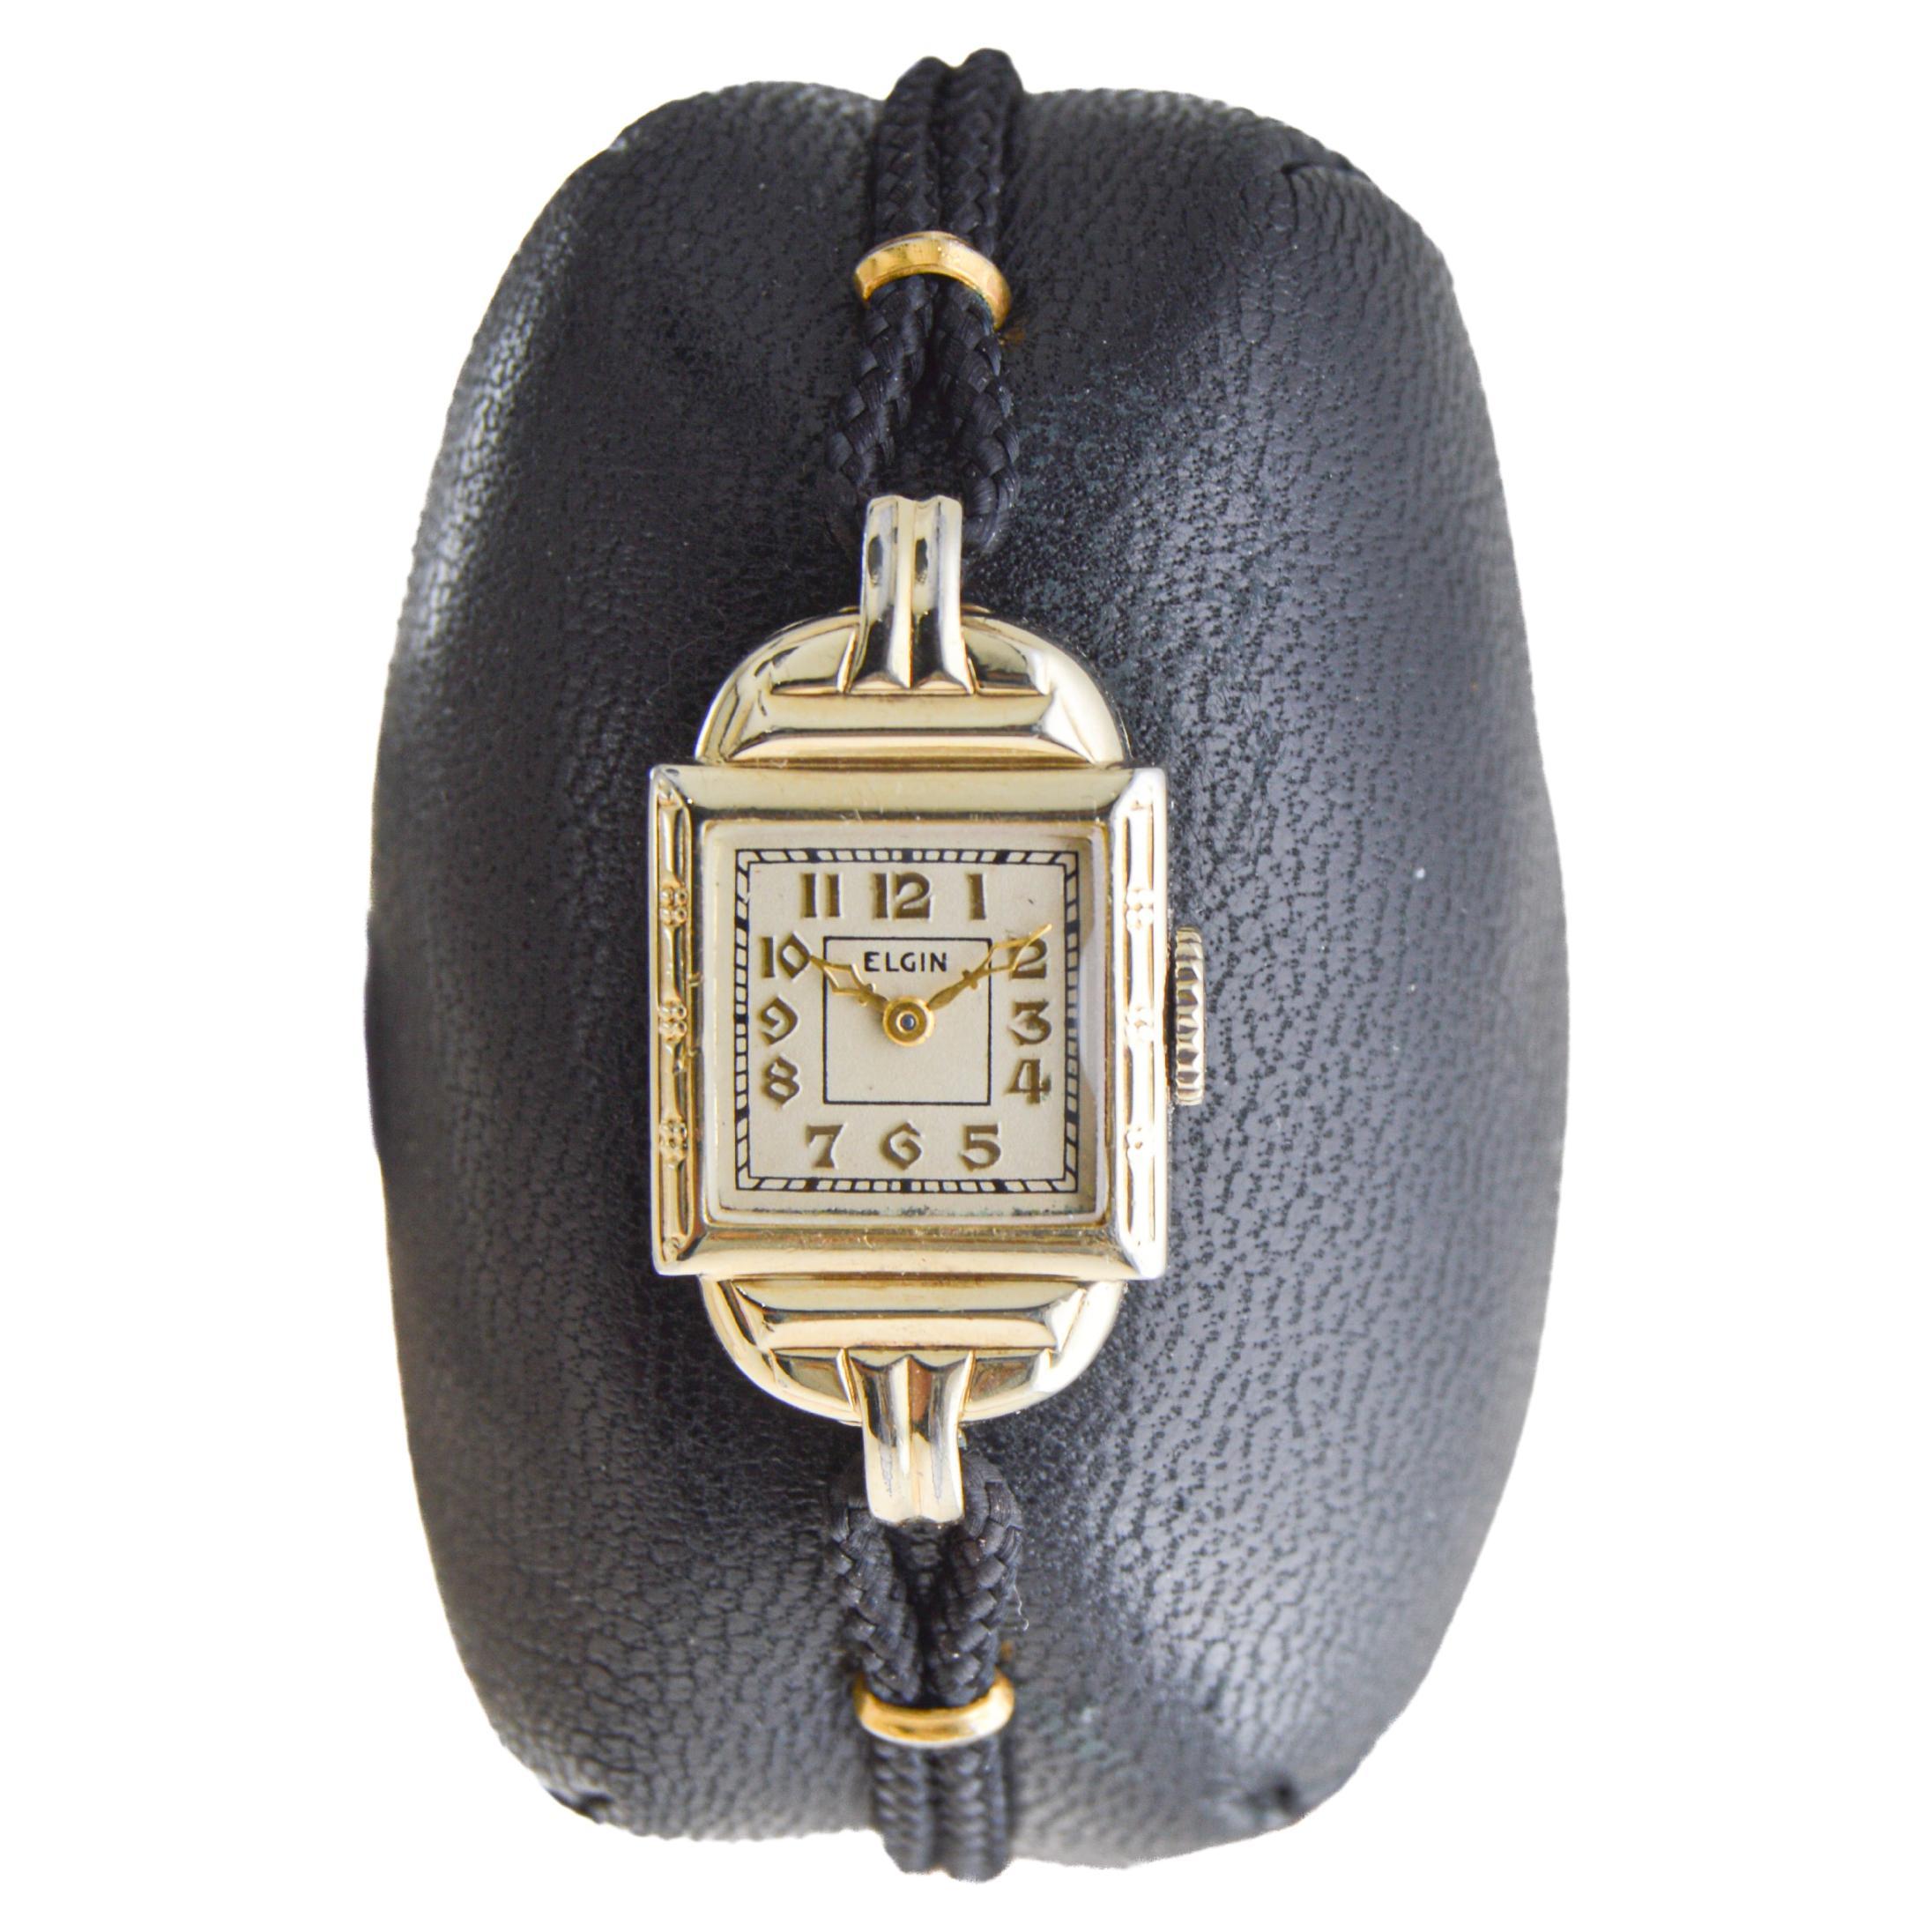  Elgin Gold Filled Art Deco Ladies Wrist Watch circa, 1930's with Original Dial  For Sale